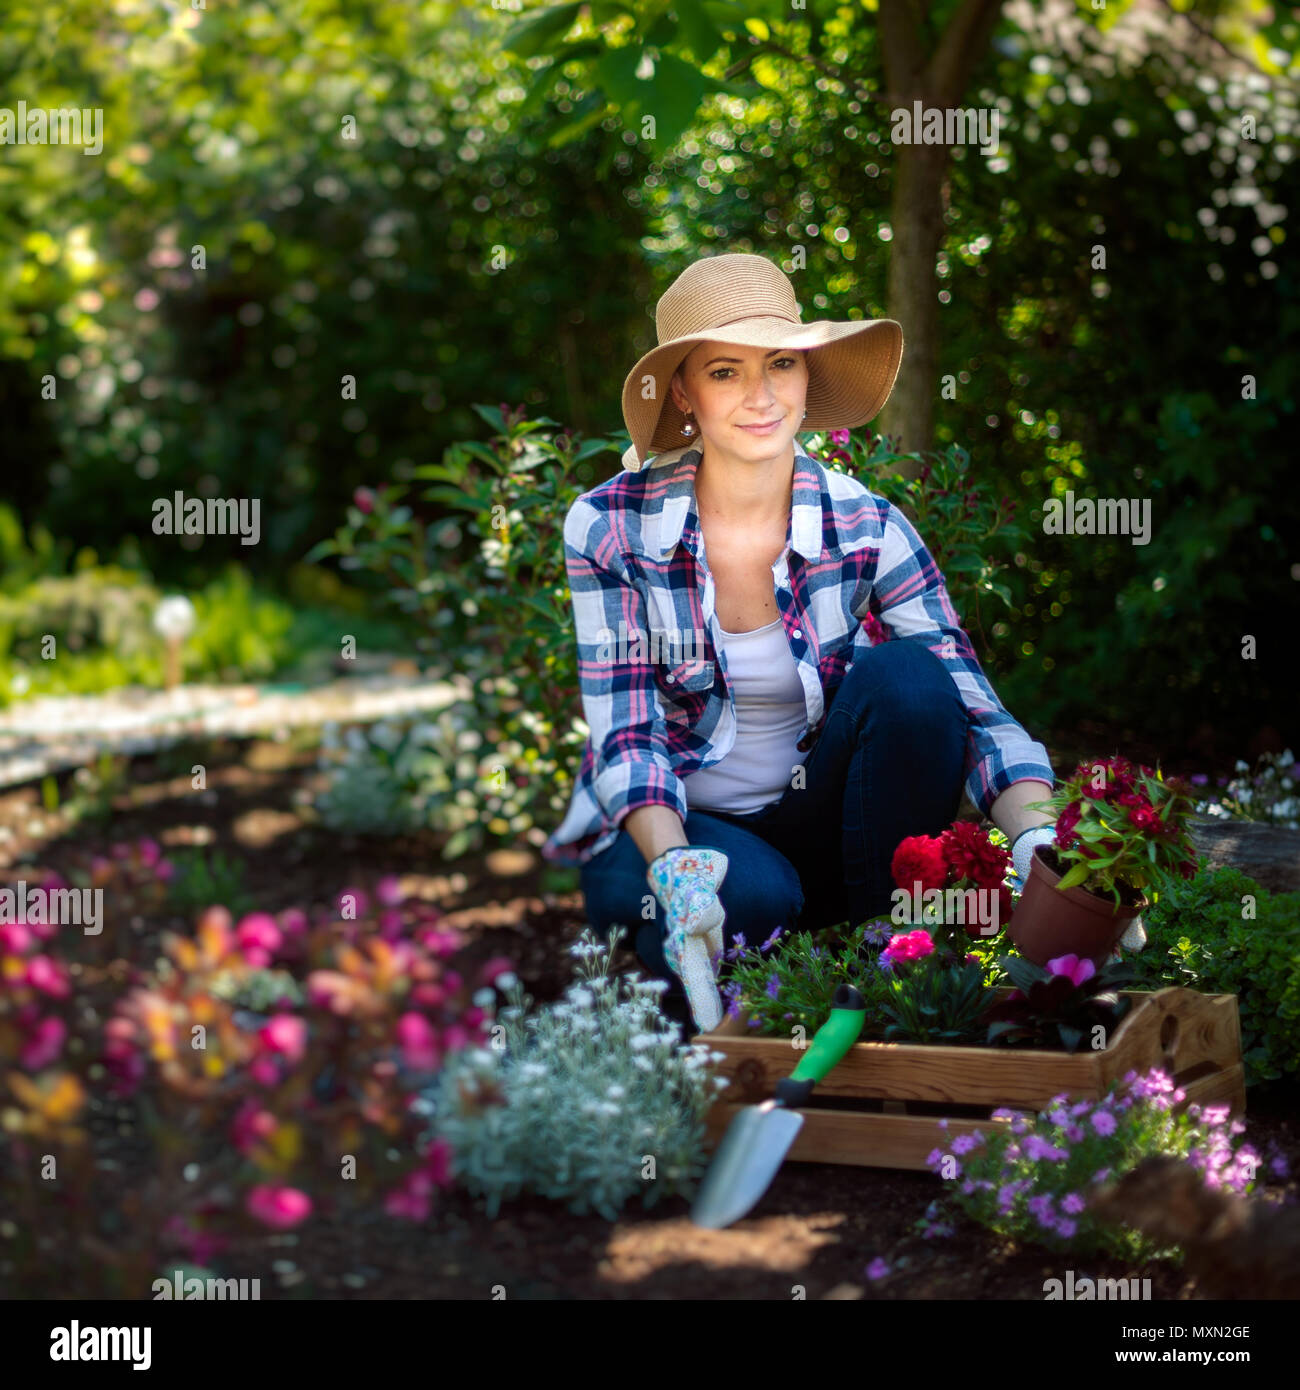 Beautiful female gardener looking at camera smiling and holding wooden crate full of flowers ready to be planted in her garden. Gardening concept. Stock Photo